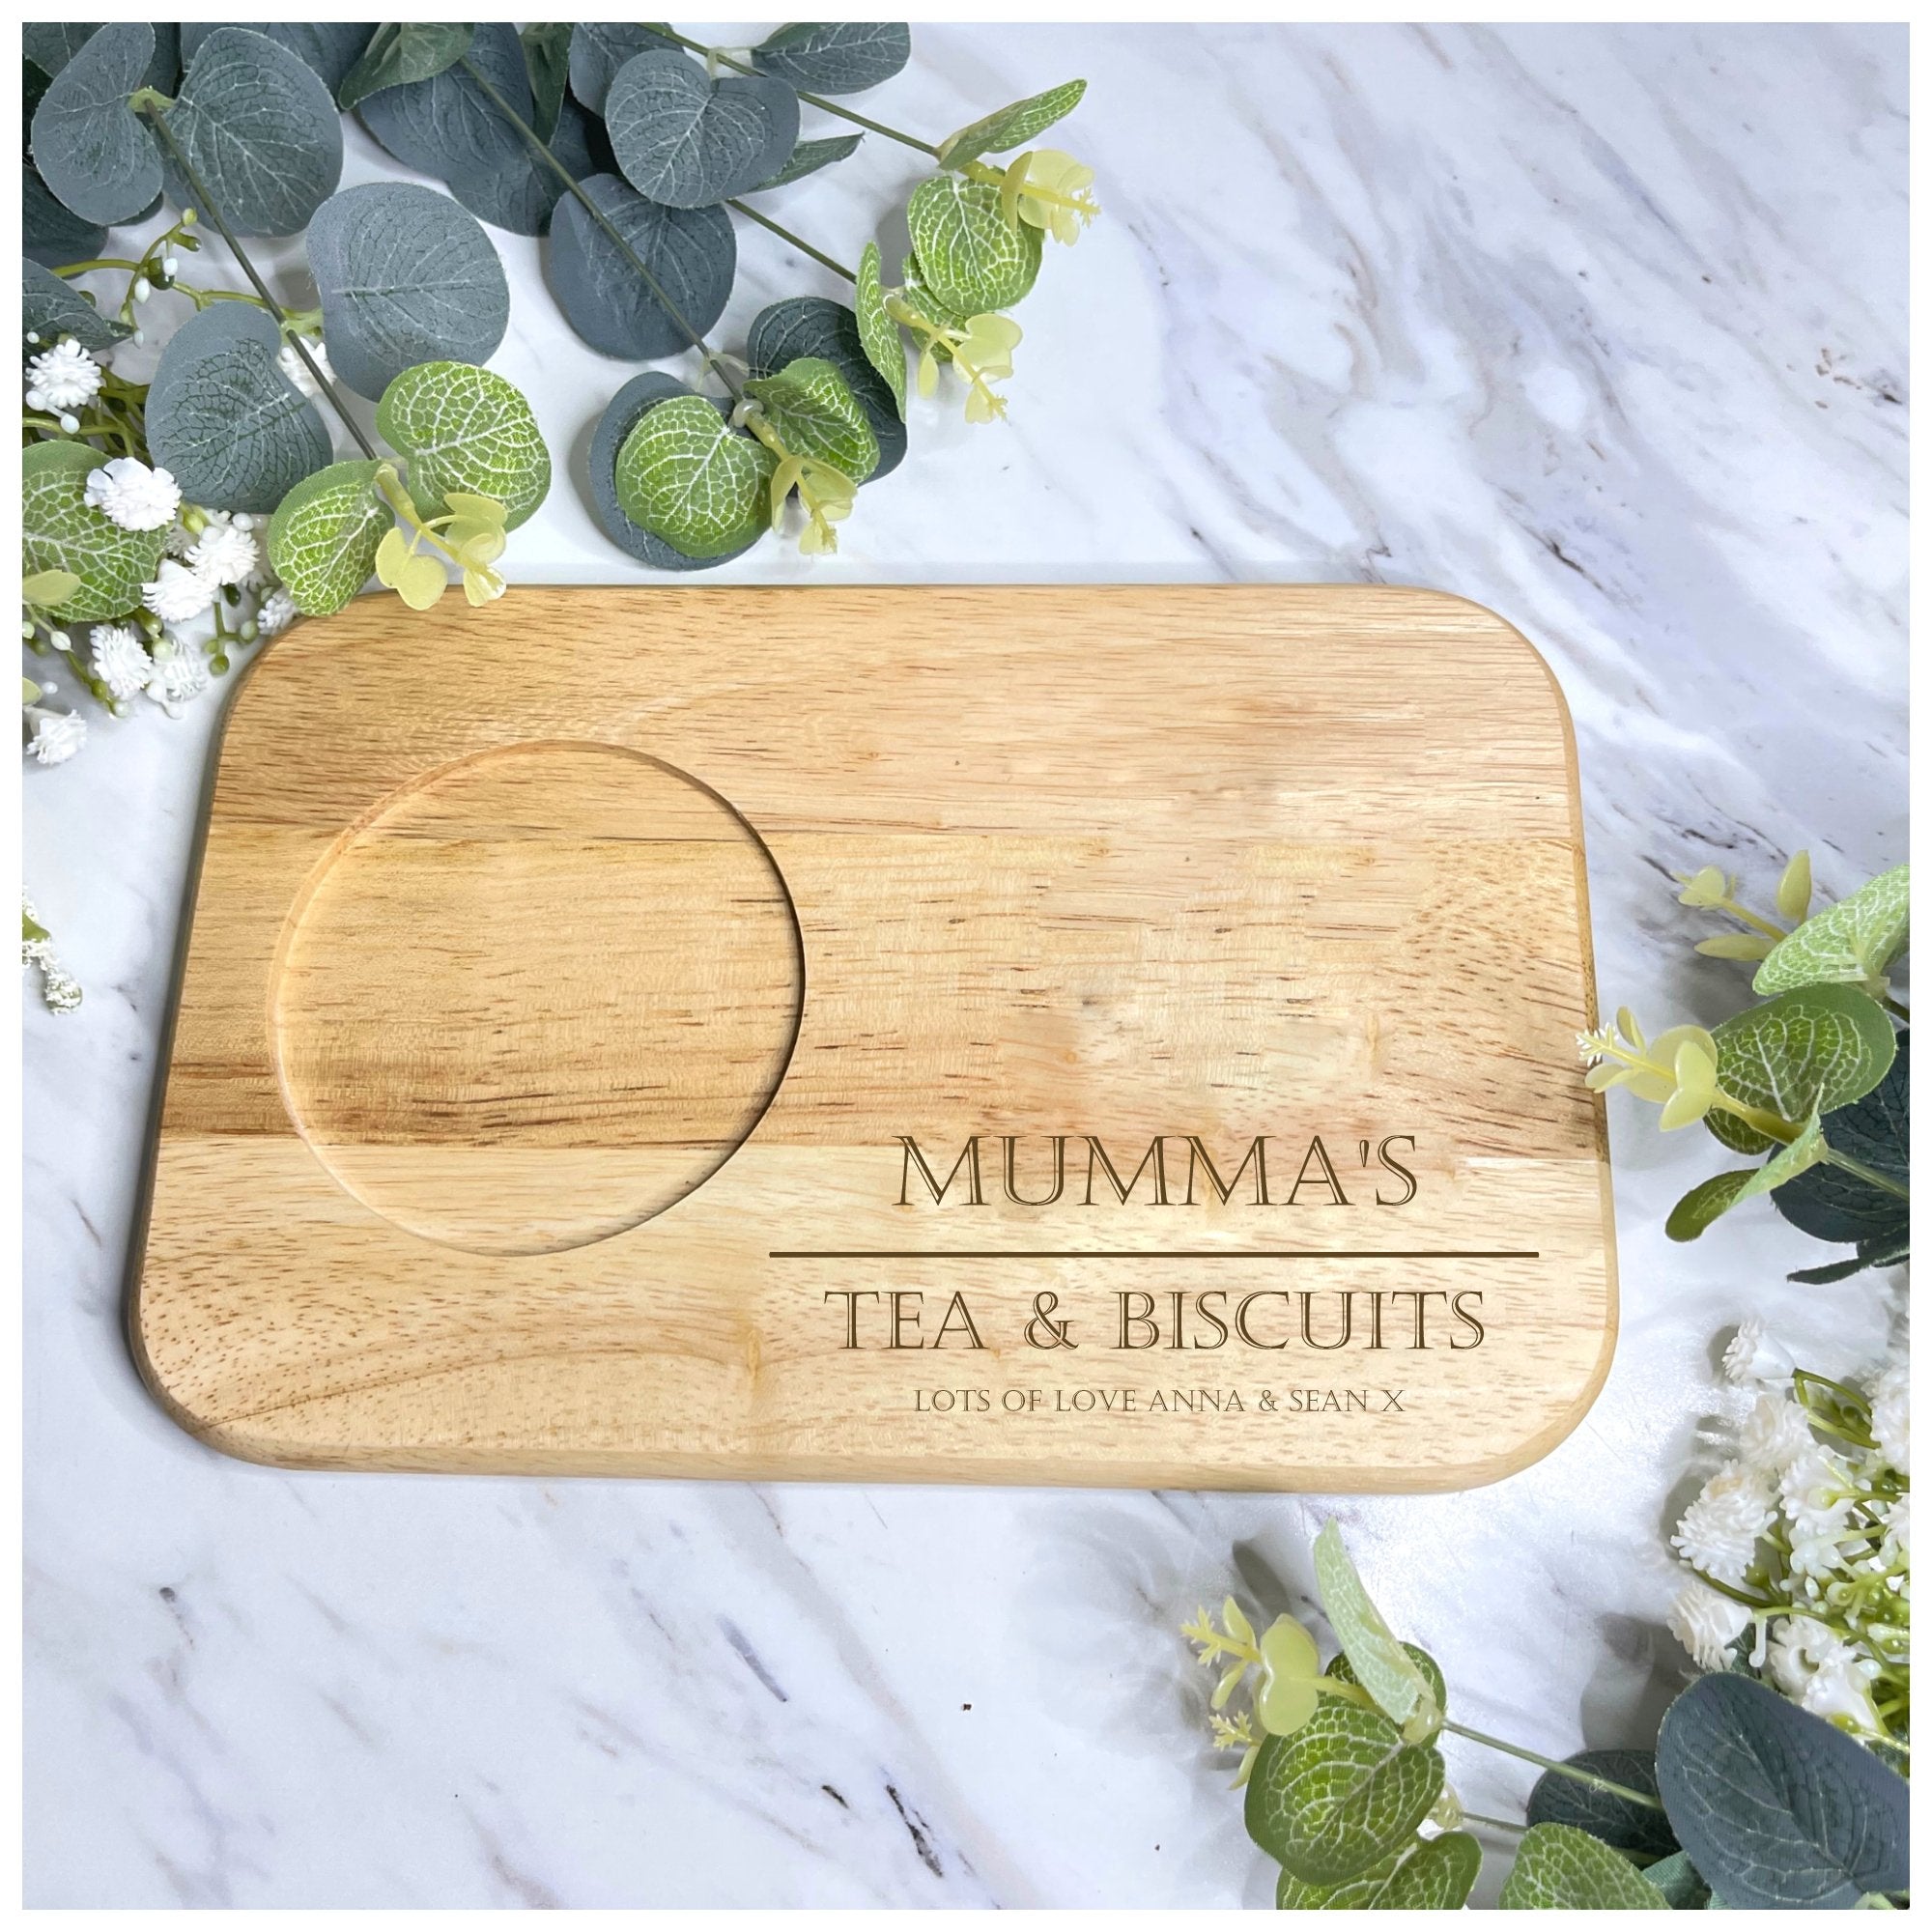 Additional images of the Tea & Biscuit Board, showcasing its exquisite craftsmanship and engraved details. Perfect for gifting on occasions like Mother's Day, birthdays, and Christmas. Board dimensions: 23cm x 15cm x 1.5cm, ideal for hosting elegant afternoon teas.